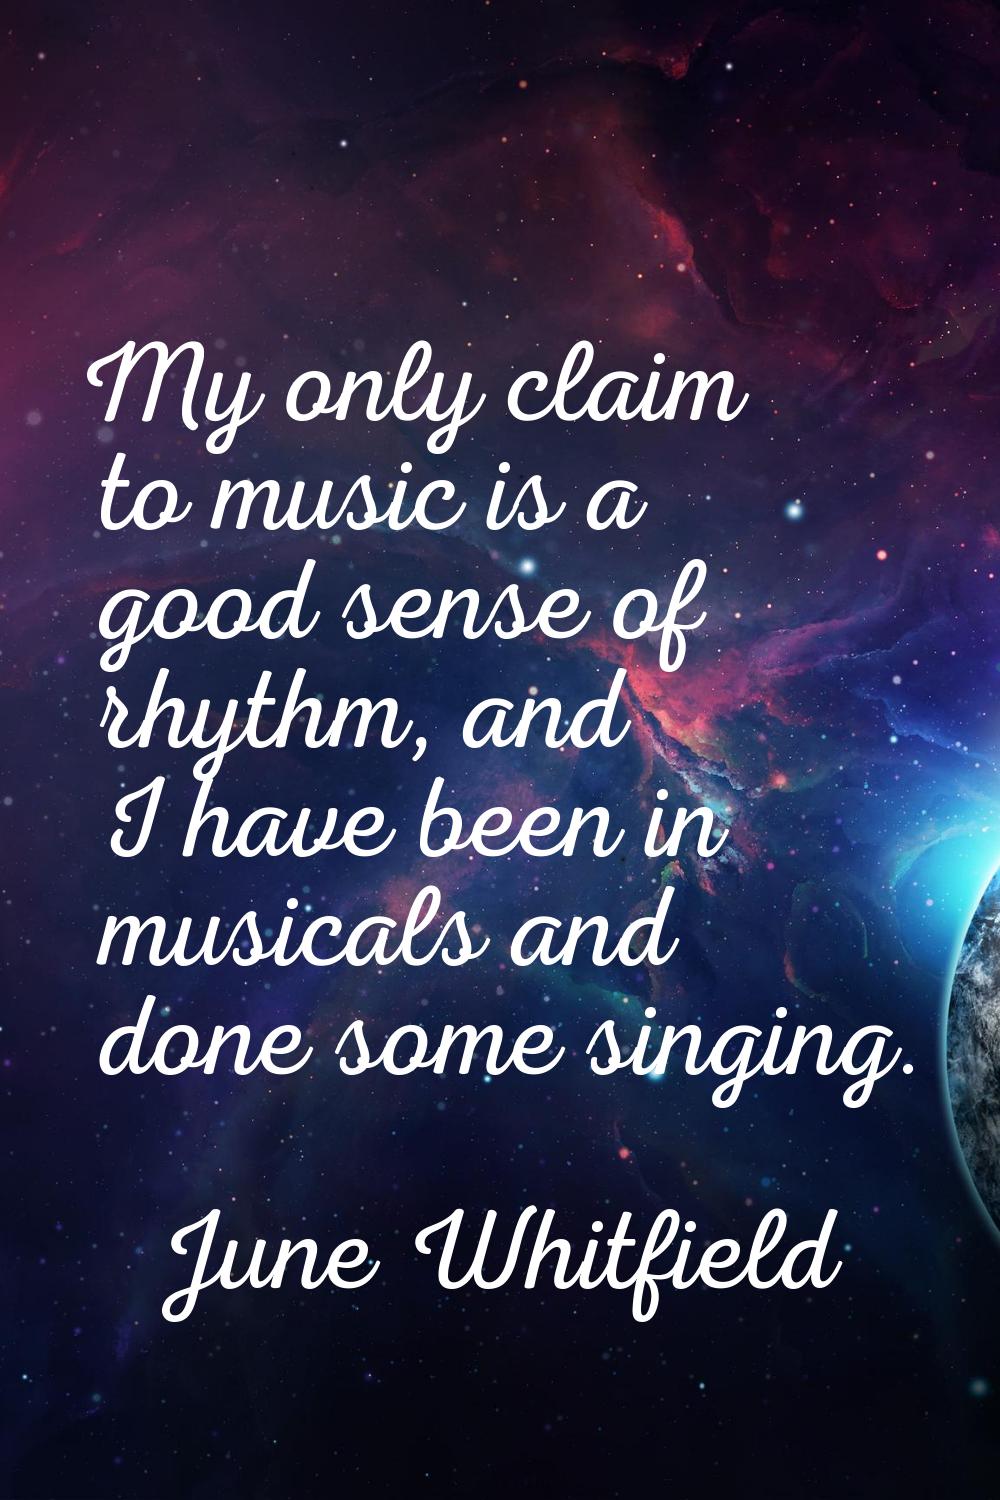 My only claim to music is a good sense of rhythm, and I have been in musicals and done some singing